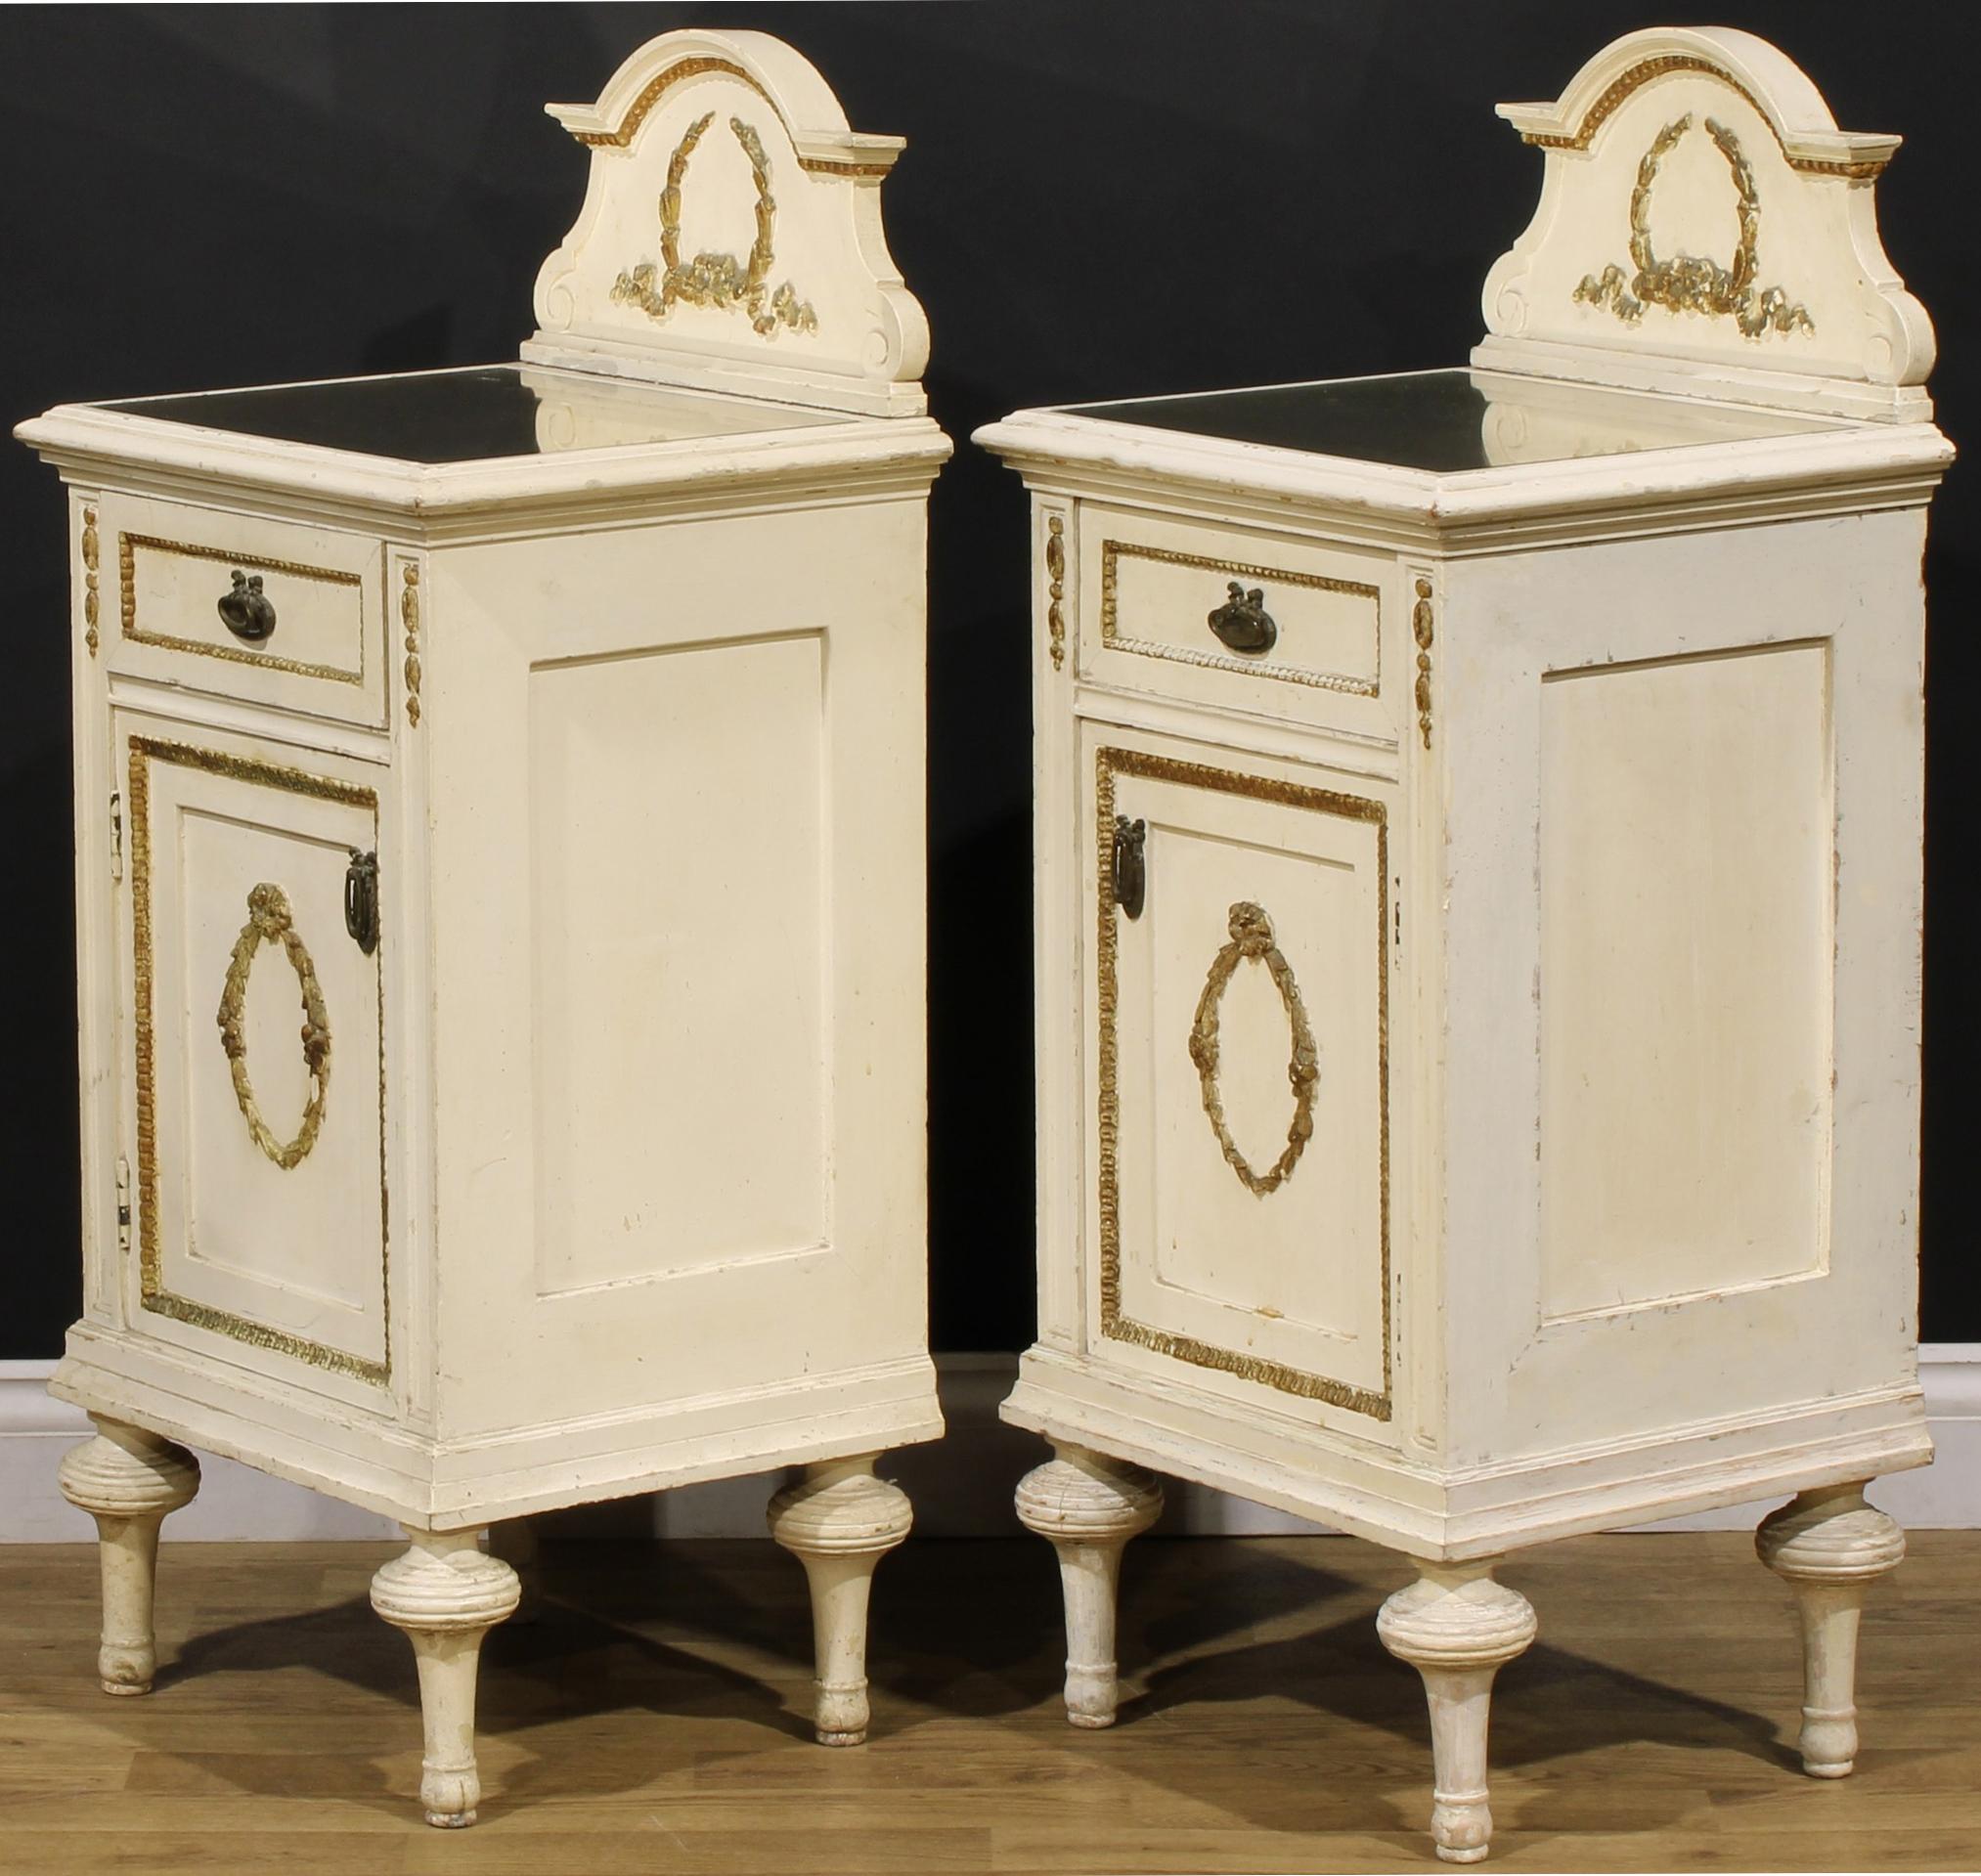 Pair of 19th Century French Louis XVI Carved Painted Nightstands Bedside Tables For Sale 1